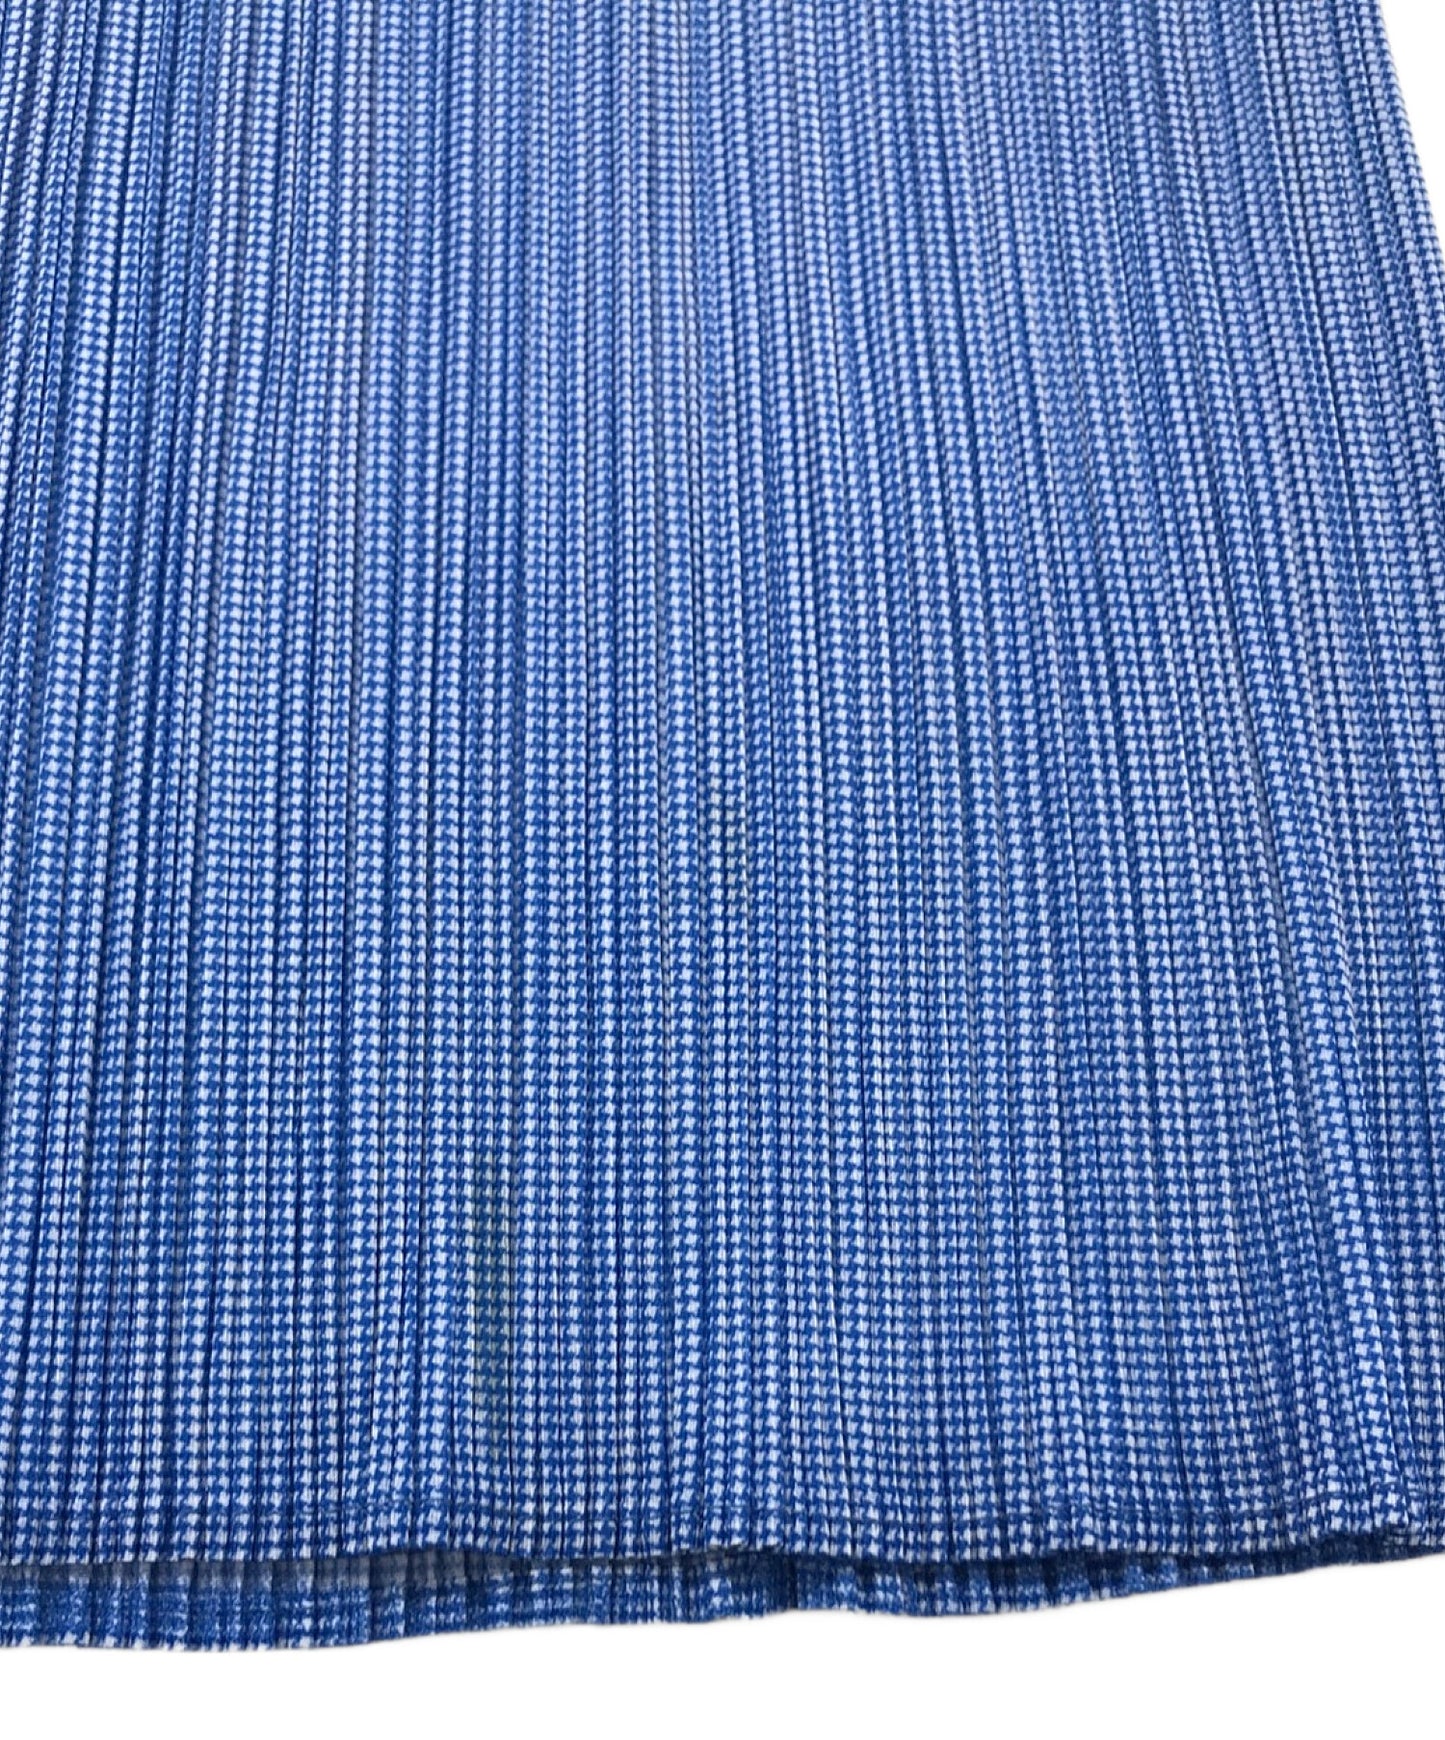 [Pre-owned] PLEATS PLEASE Pleated Skirt PLEATS PLEASE Pleats Pleases Blue and White Size 2 PP82-JG813